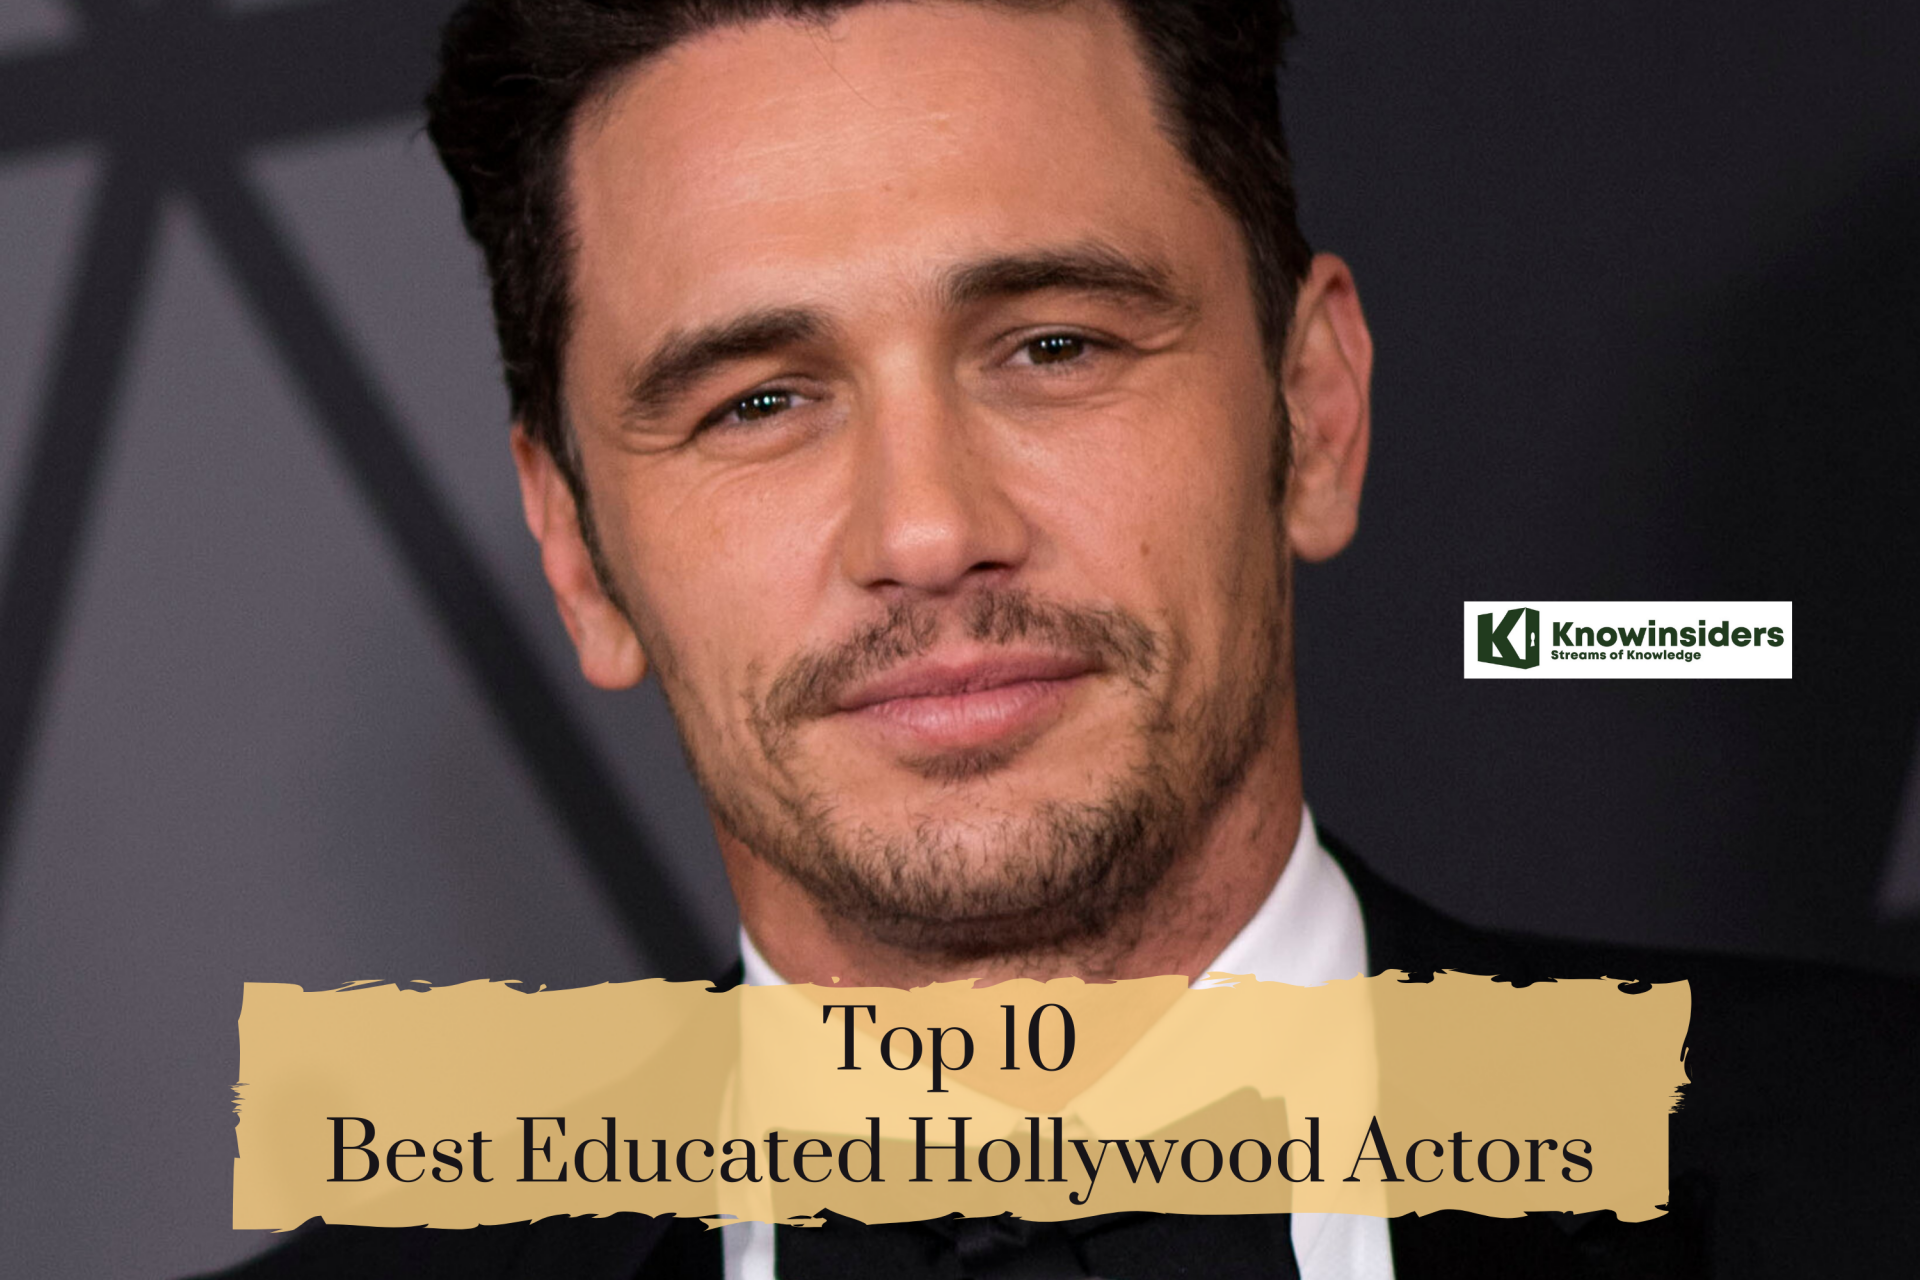 Top 10 Best Educated Hollywood Actors